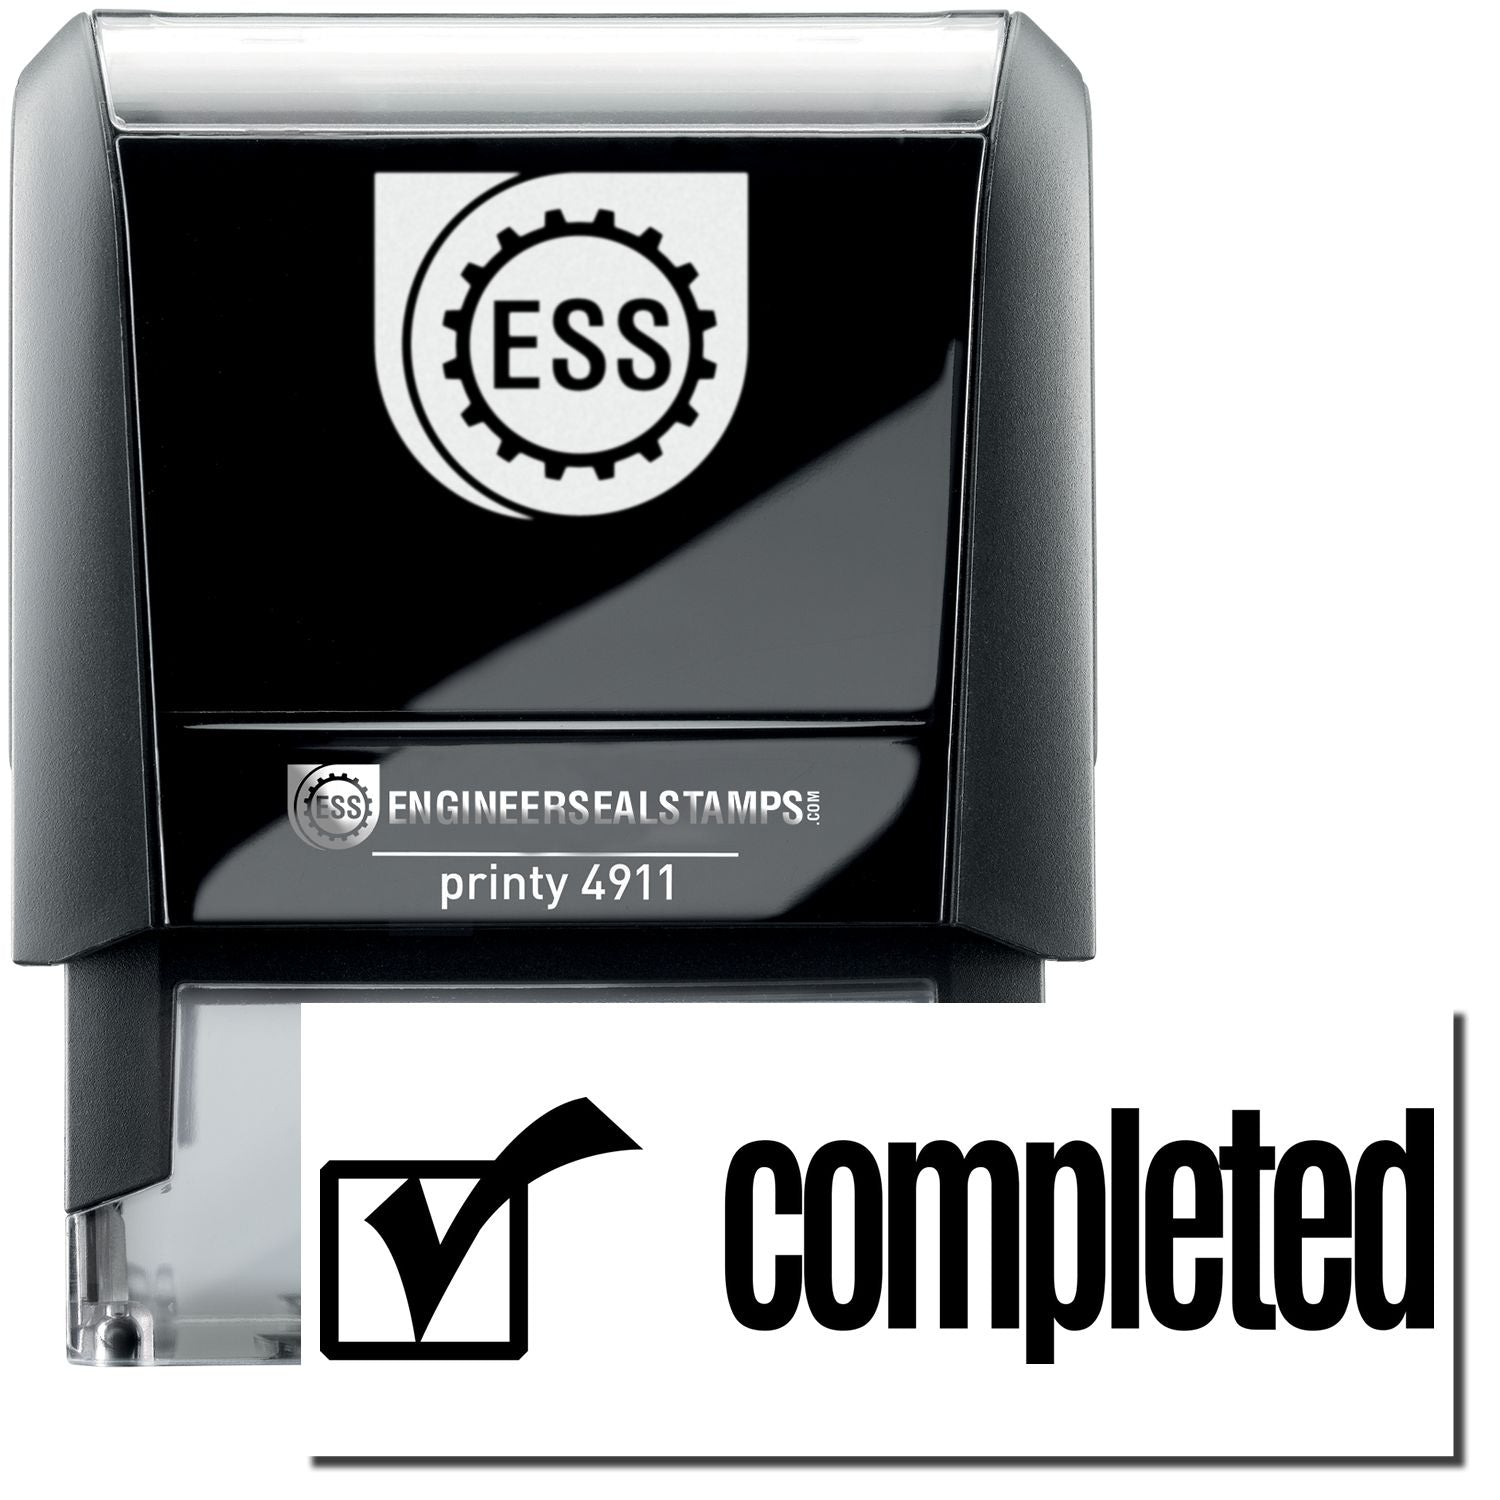 A self-inking stamp with a stamped image showing how the text "completed" with an icon of a checkbox on the left is displayed after stamping.